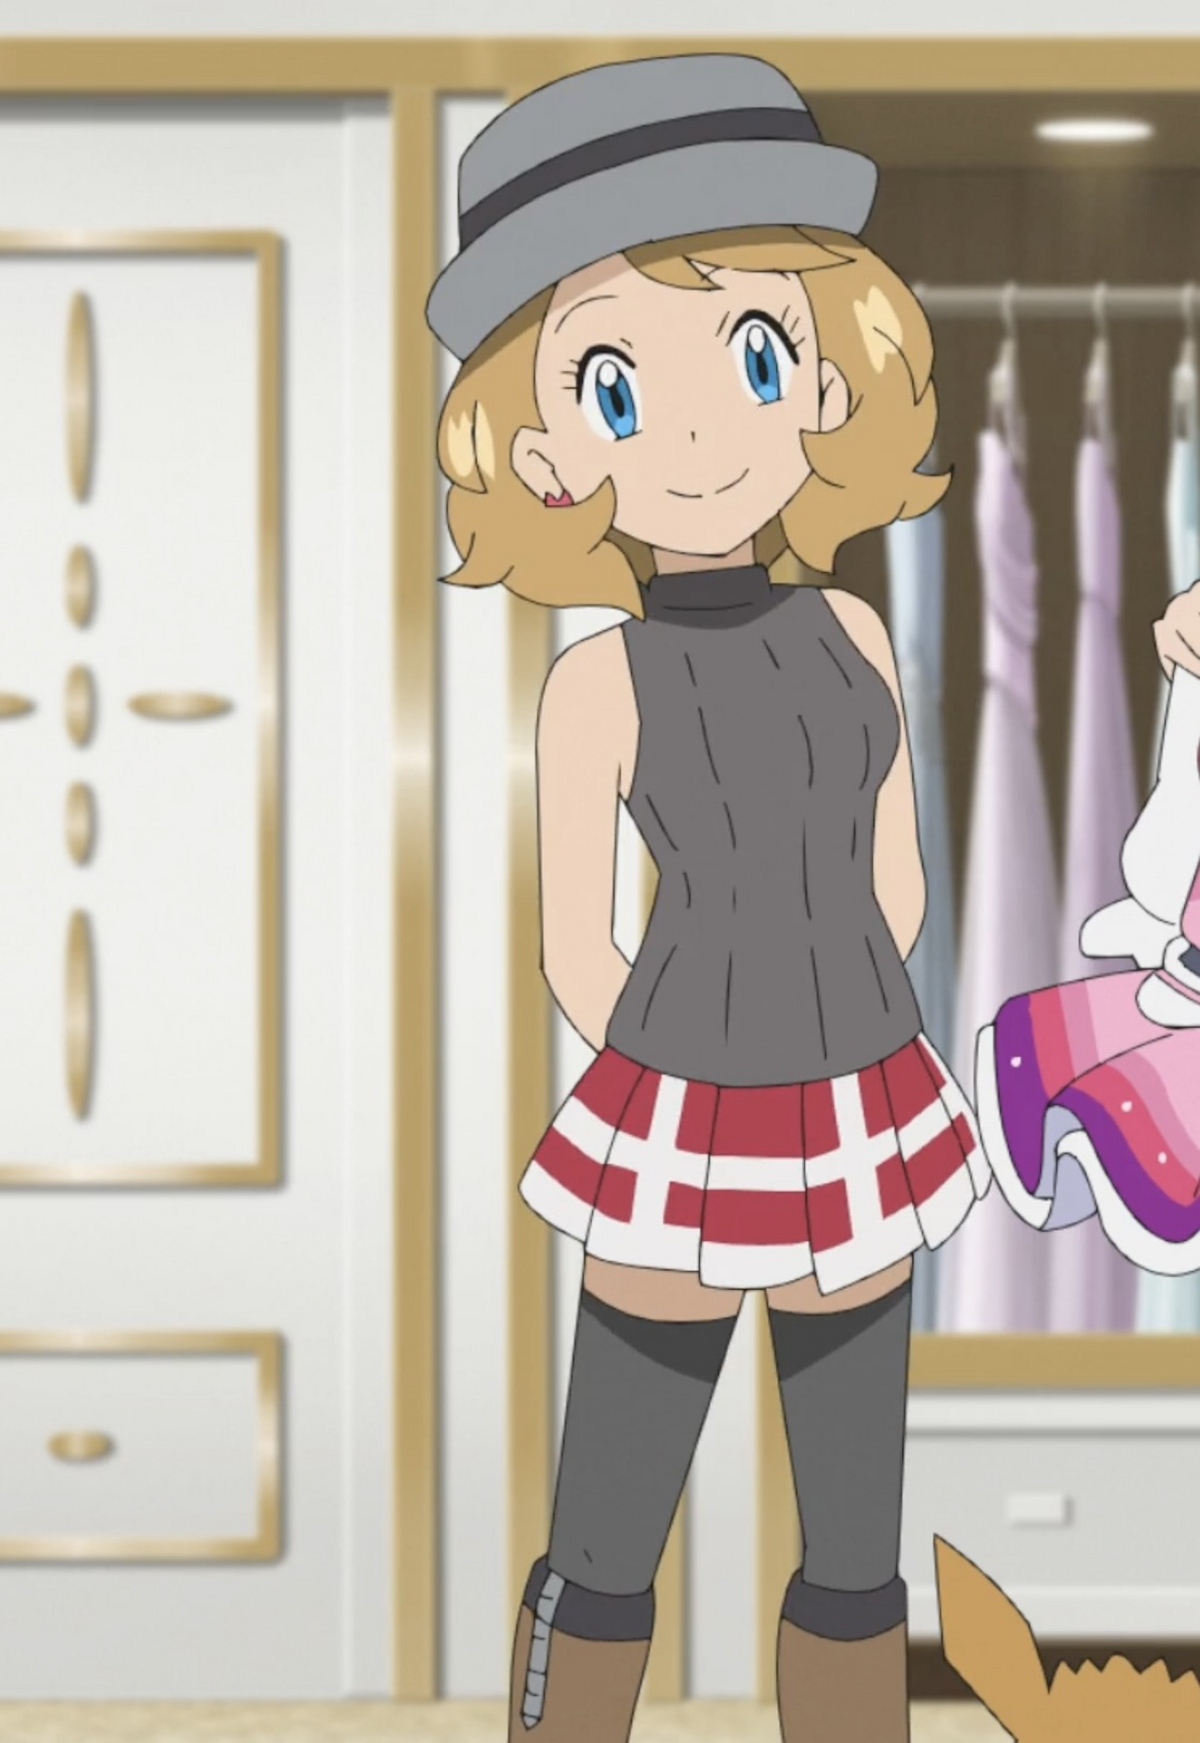 Pokémon is Life. - Dawn's a Part of Team Rocket now, never would actually  happen but still looks cute in it-Greninja